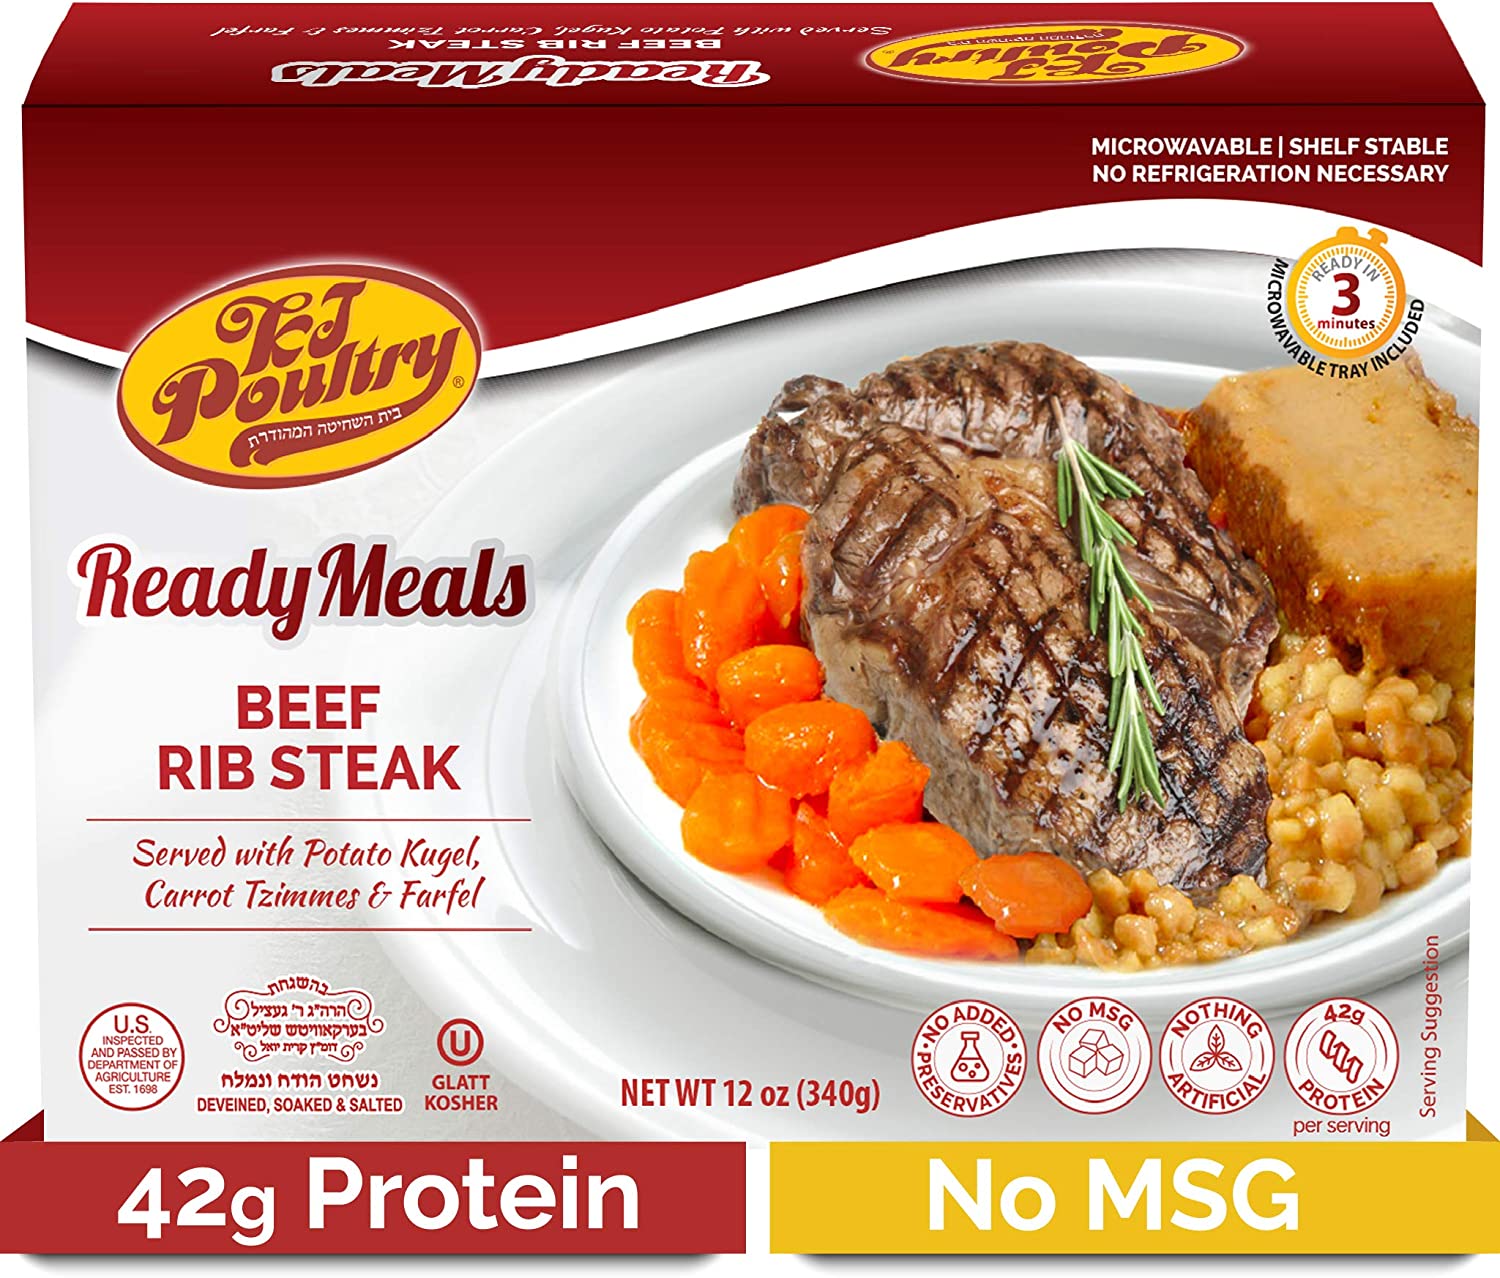 Kosher MRE Meat Meals Ready to Eat, Beef Rib Steak & Kugel (1 Pack) Prepared Entree Fully Cooked, Shelf Stable Microwave Dinner – Travel, Military, Camping, Emergency Survival Protein Food Supply